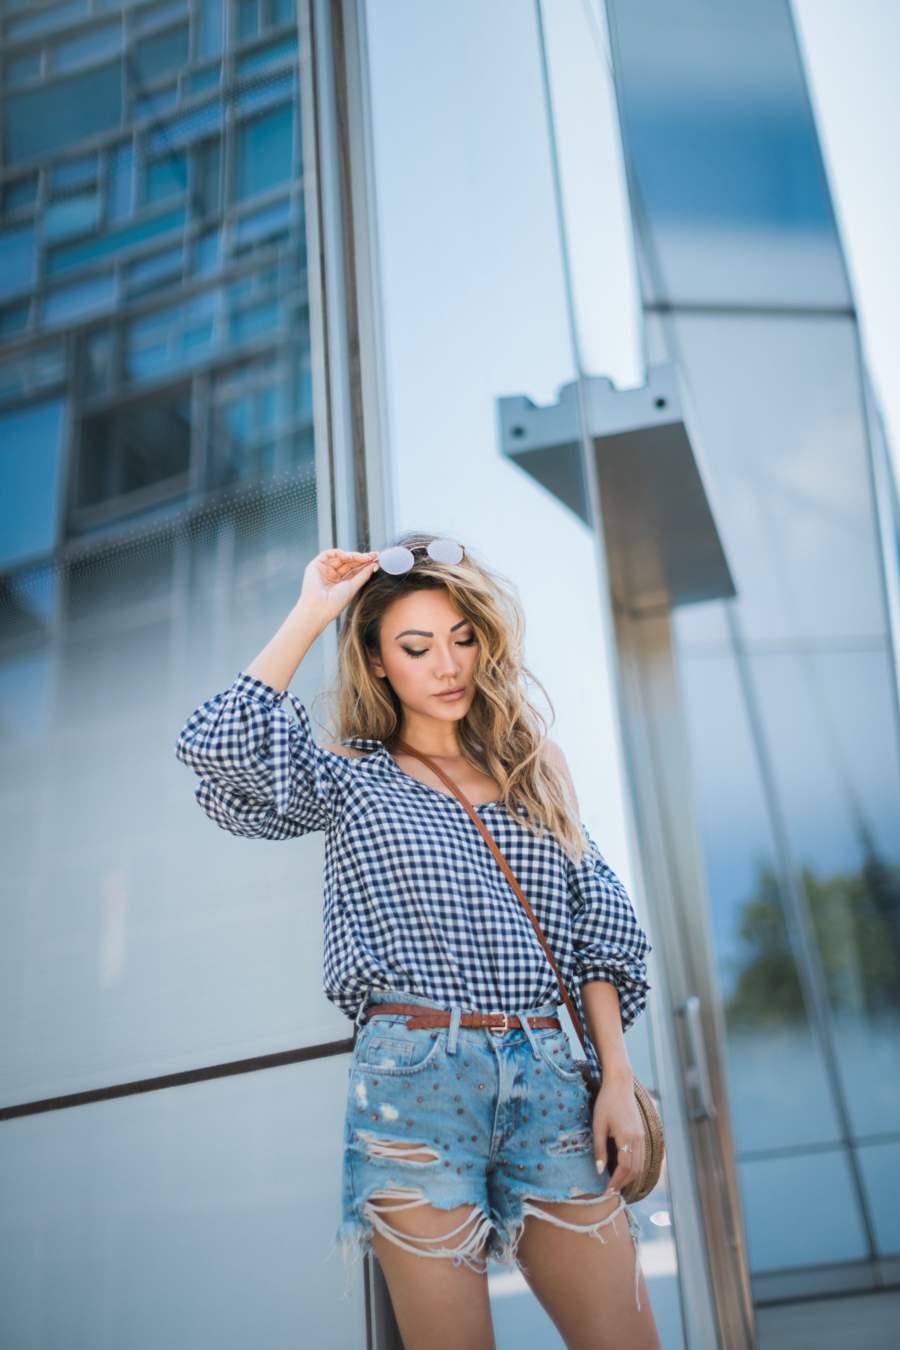 Summer casual gingham look - 5 Updated Gingham Trends You'll Love For Summer // NotJessFashion.com